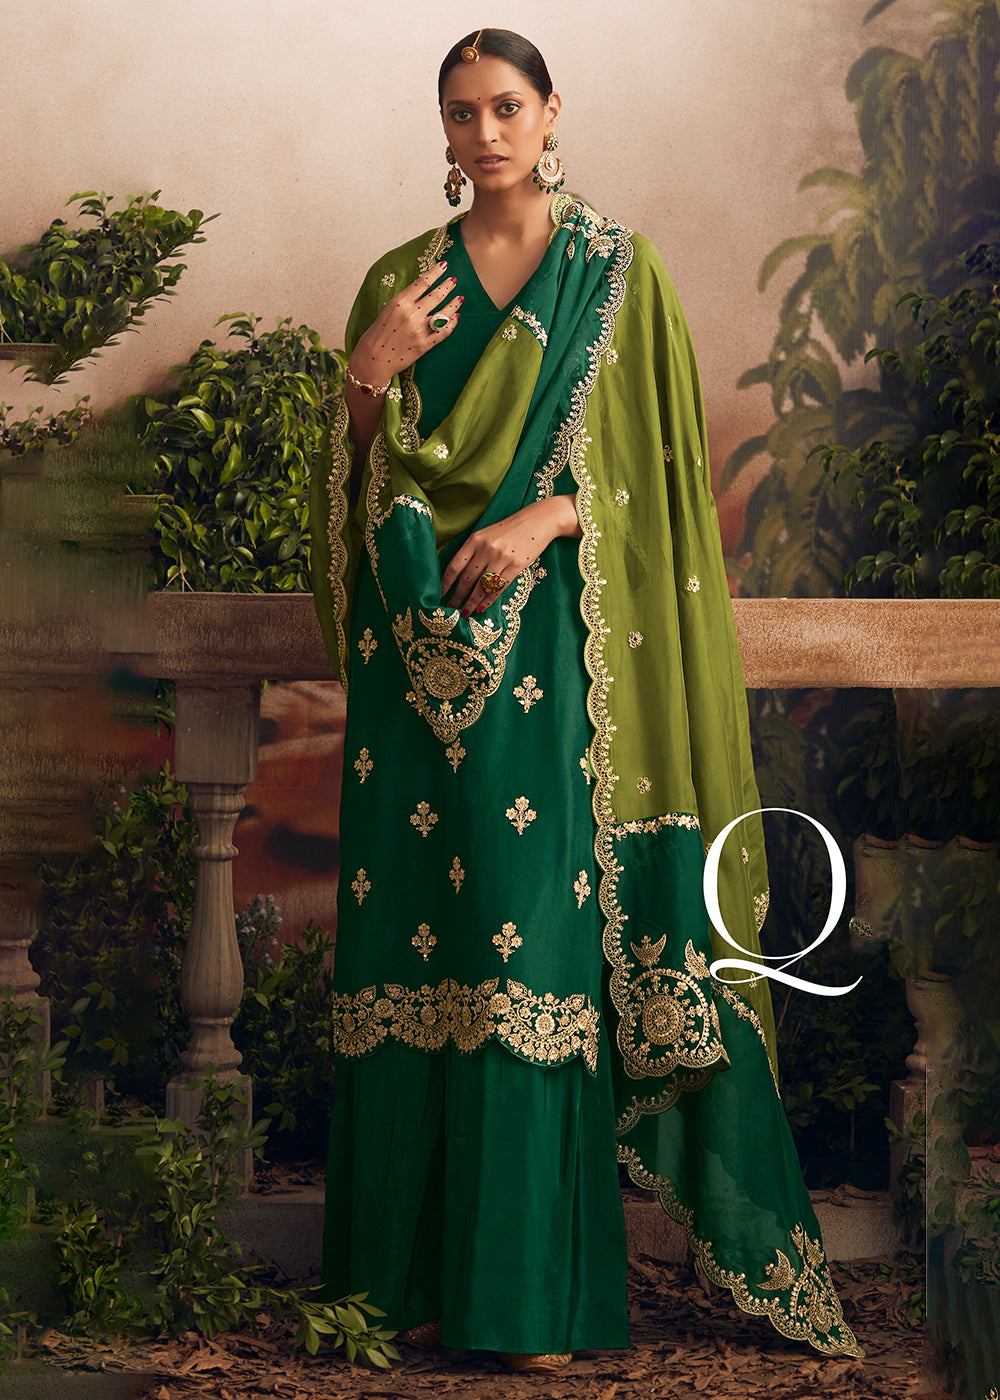 Buy Now Silk Modale Dark Green Embroidered Festive Salwar Suit Online in USA, UK, Canada, Germany, Australia & Worldwide at Empress Clothing.